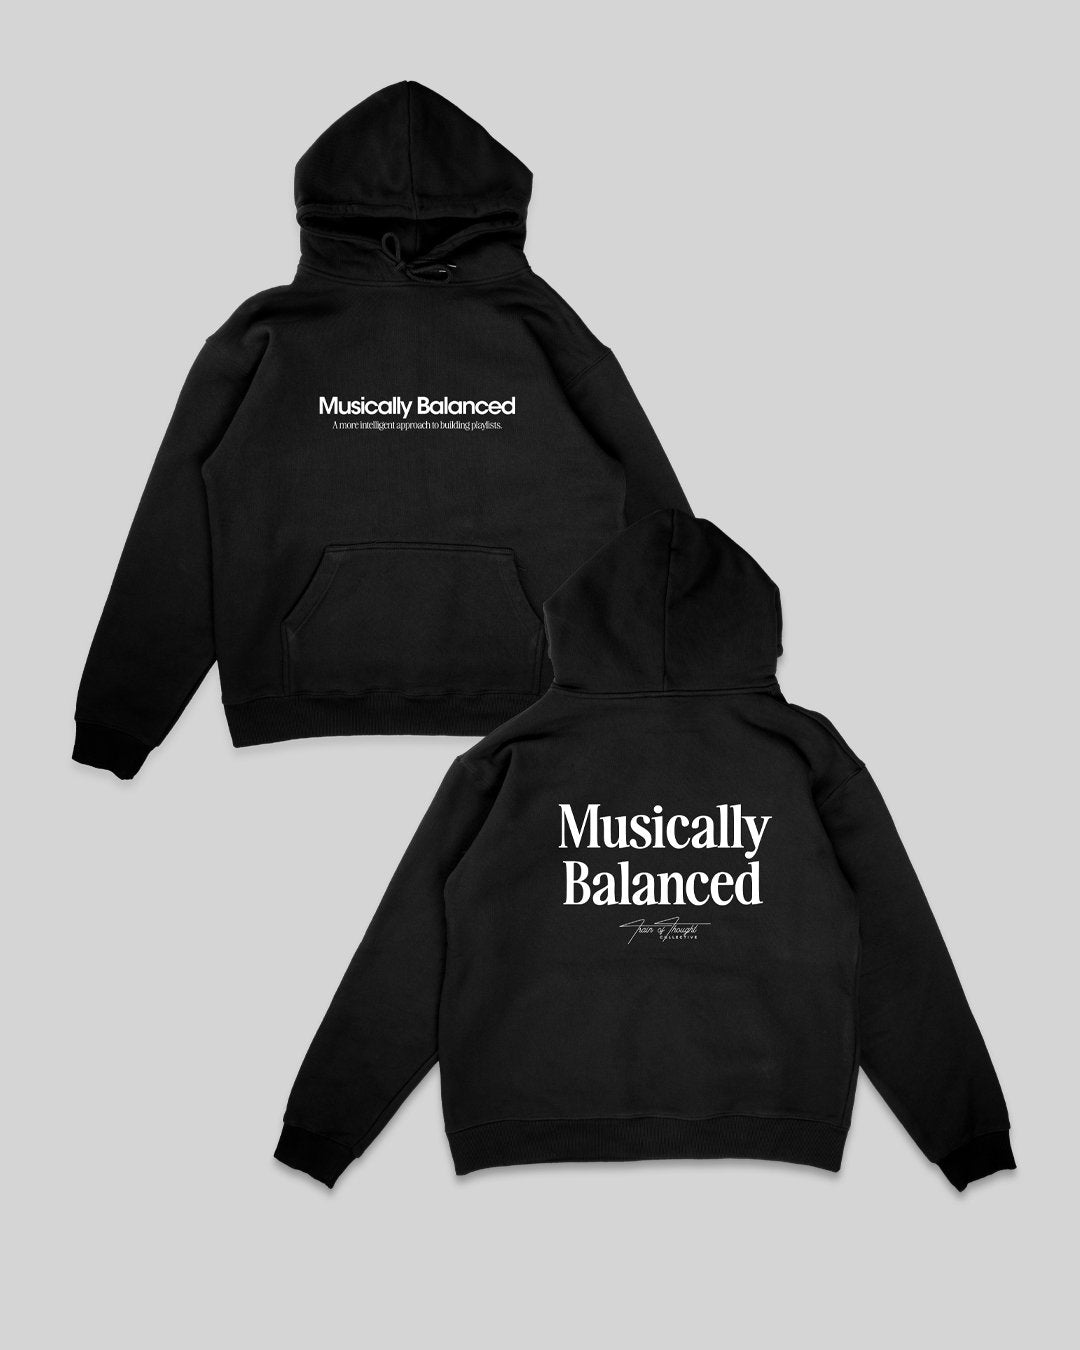 Musically Balanced 2.0 Black Hoodie - trainofthoughtcollective